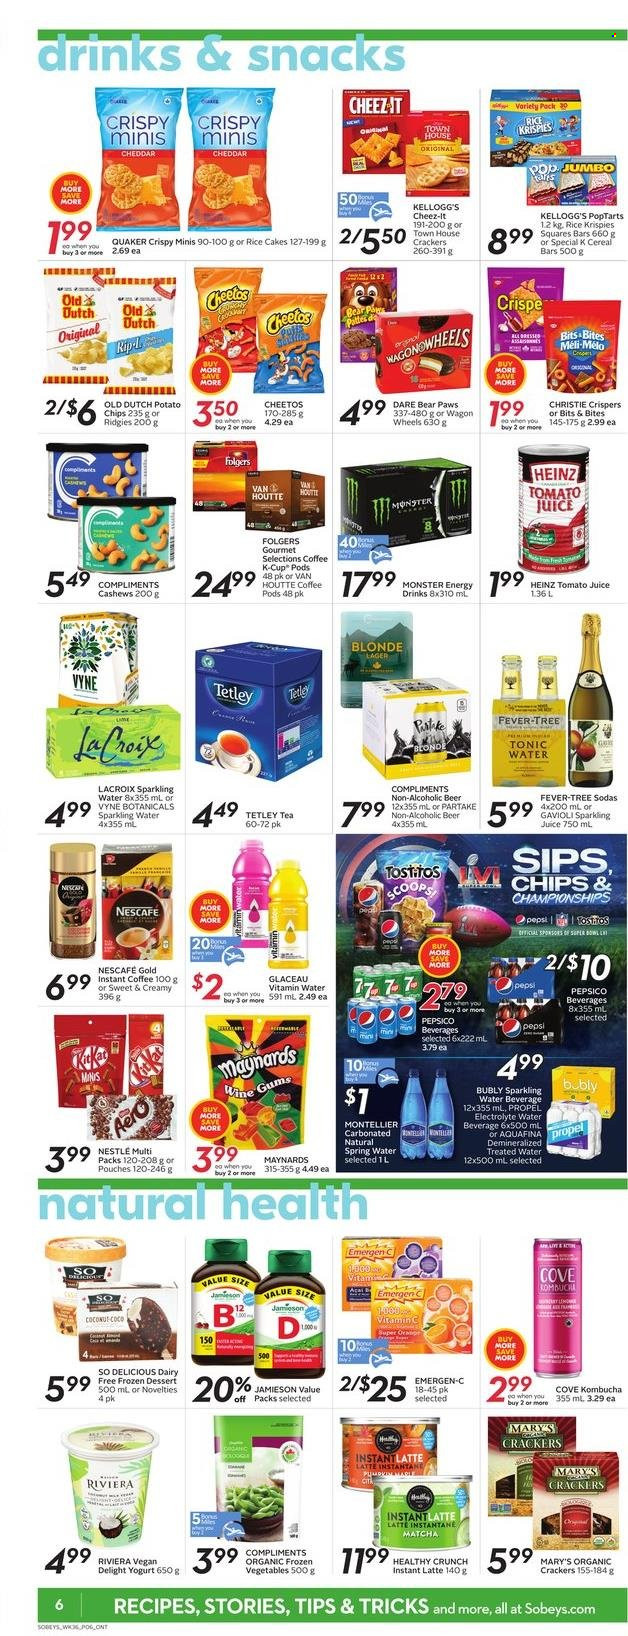 thumbnail - Sobeys Flyer - December 30, 2021 - January 05, 2022 - Sales products - Quaker, cheese, yoghurt, frozen vegetables, cereal bar, crackers, Kellogg's, potato chips, Cheetos, Cheez-It, Tostitos, Heinz, cereals, Rice Krispies, cashews, tomato juice, Pepsi, juice, energy drink, Monster, tonic, Monster Energy, sparkling juice, Aquafina, spring water, sparkling water, vitamin water, kombucha, matcha, tea, coffee pods, instant coffee, Folgers, coffee capsules, K-Cups, beer, Lager, Paws, vitamin c, Emergen-C, Nestlé, Nescafé. Page 6.